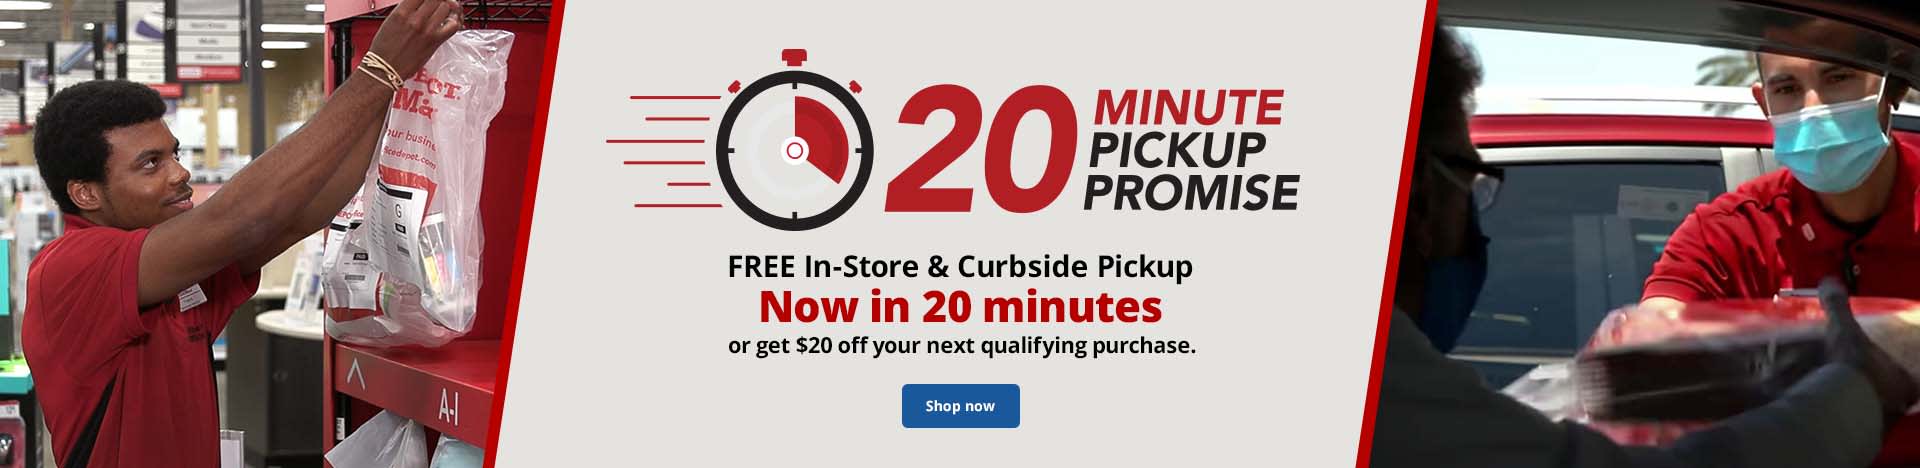 FREE In-Store & Curbside Pickup. Now in 20 minutes or get $20 off your next purchase